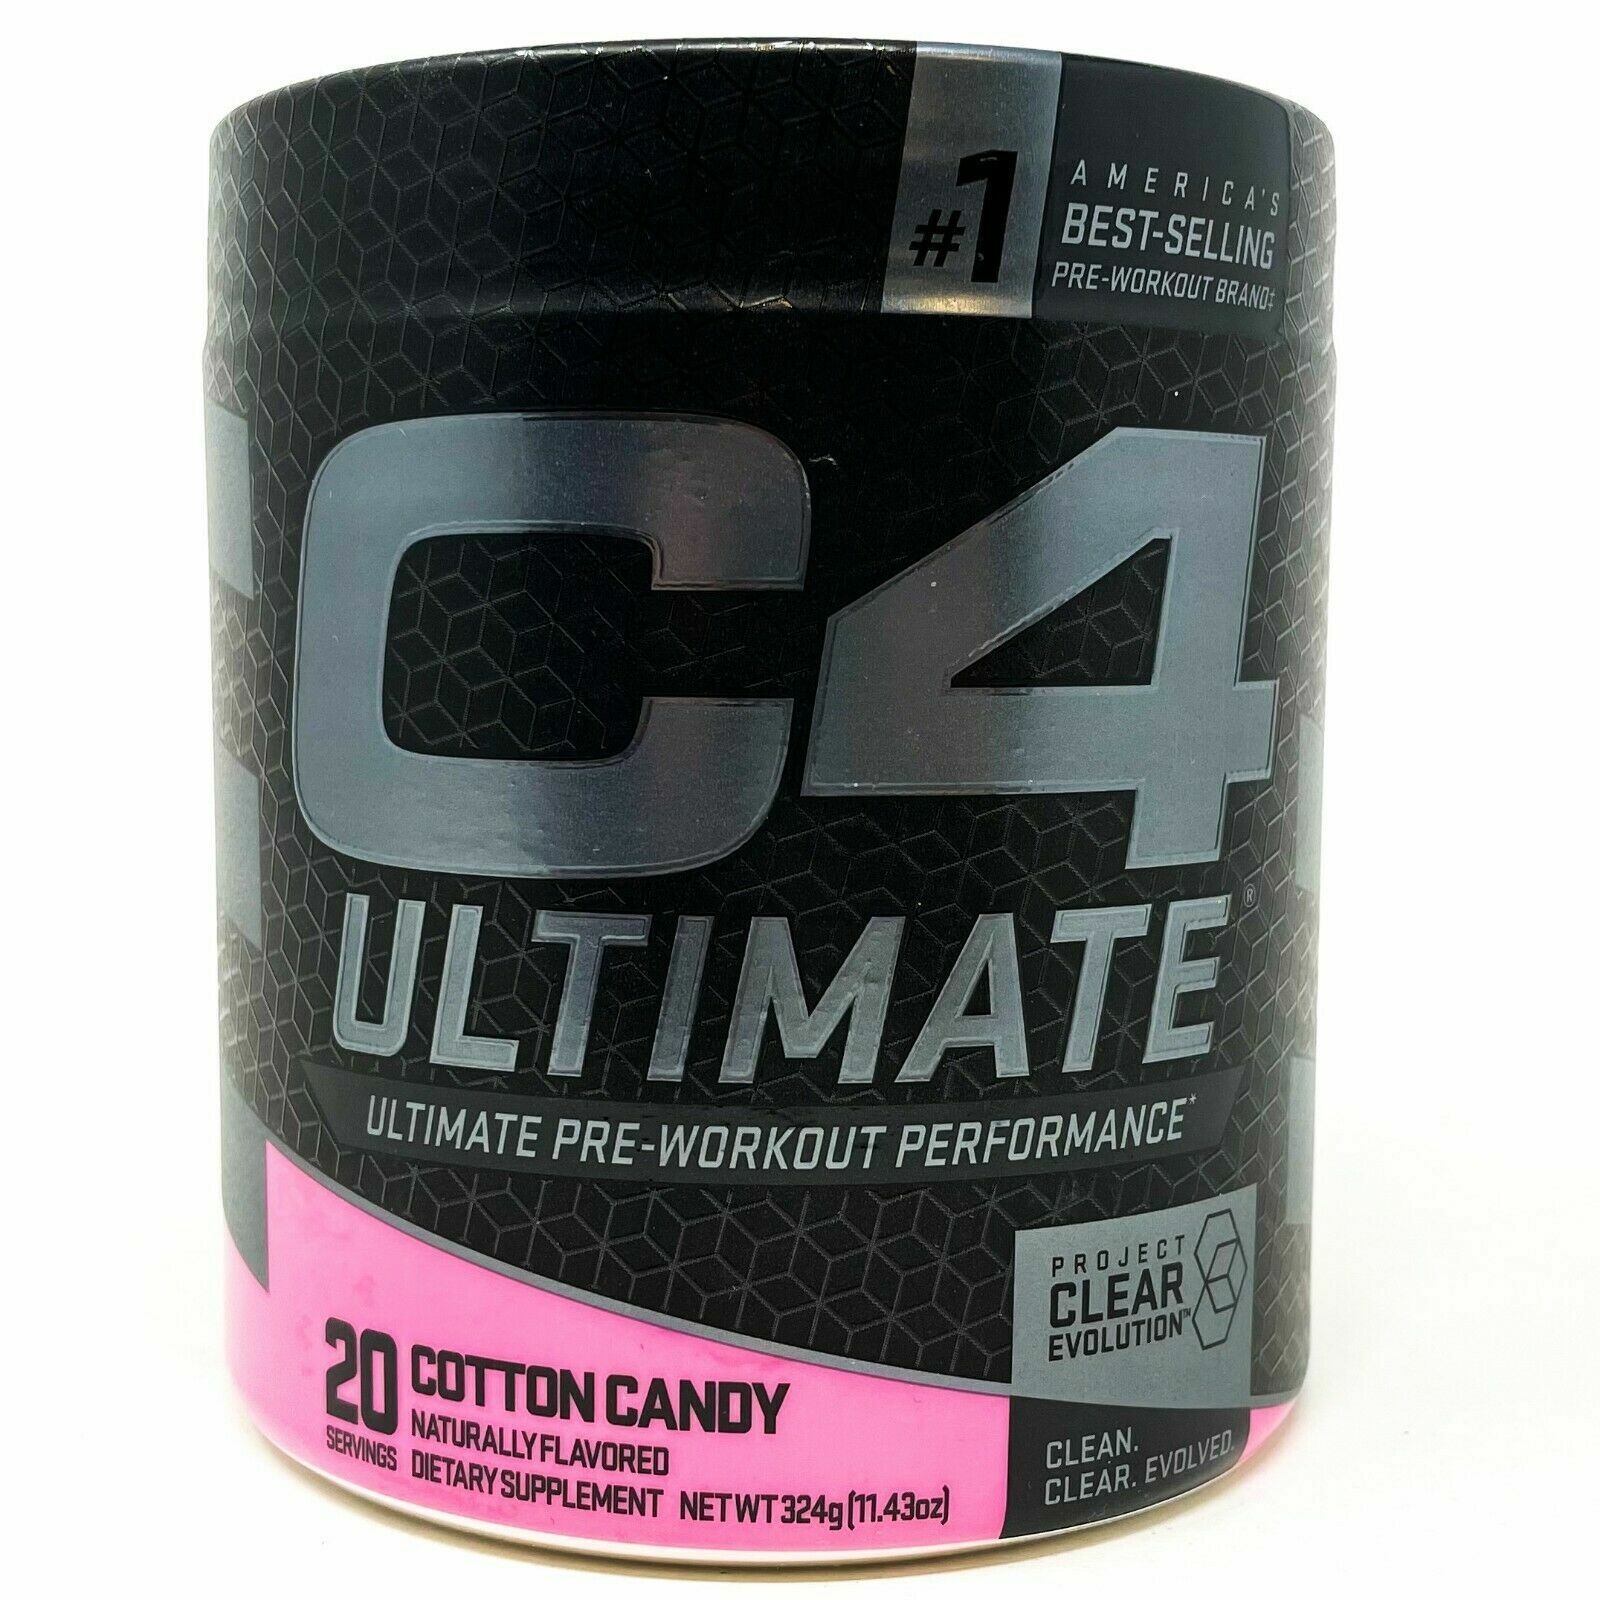 Cellucor C4 Ultimate Pre-Workout Powder 20 Servings Cotton Candy EX:10/2021